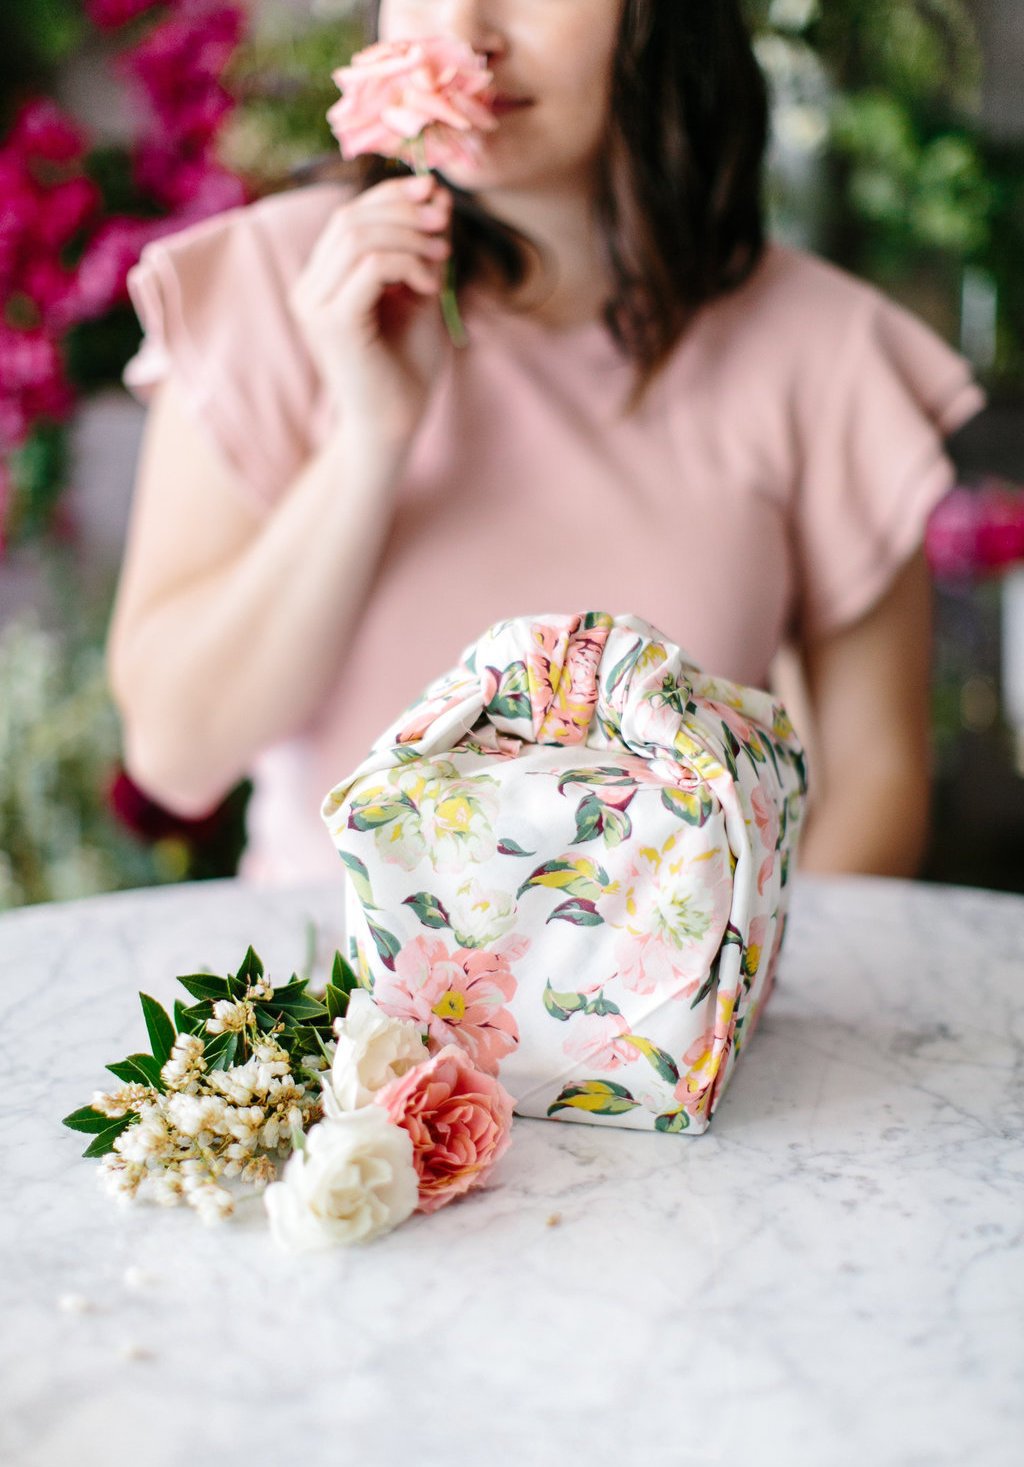 furoshiki wrapping, the prettiest way to wrap gifts with fabric!